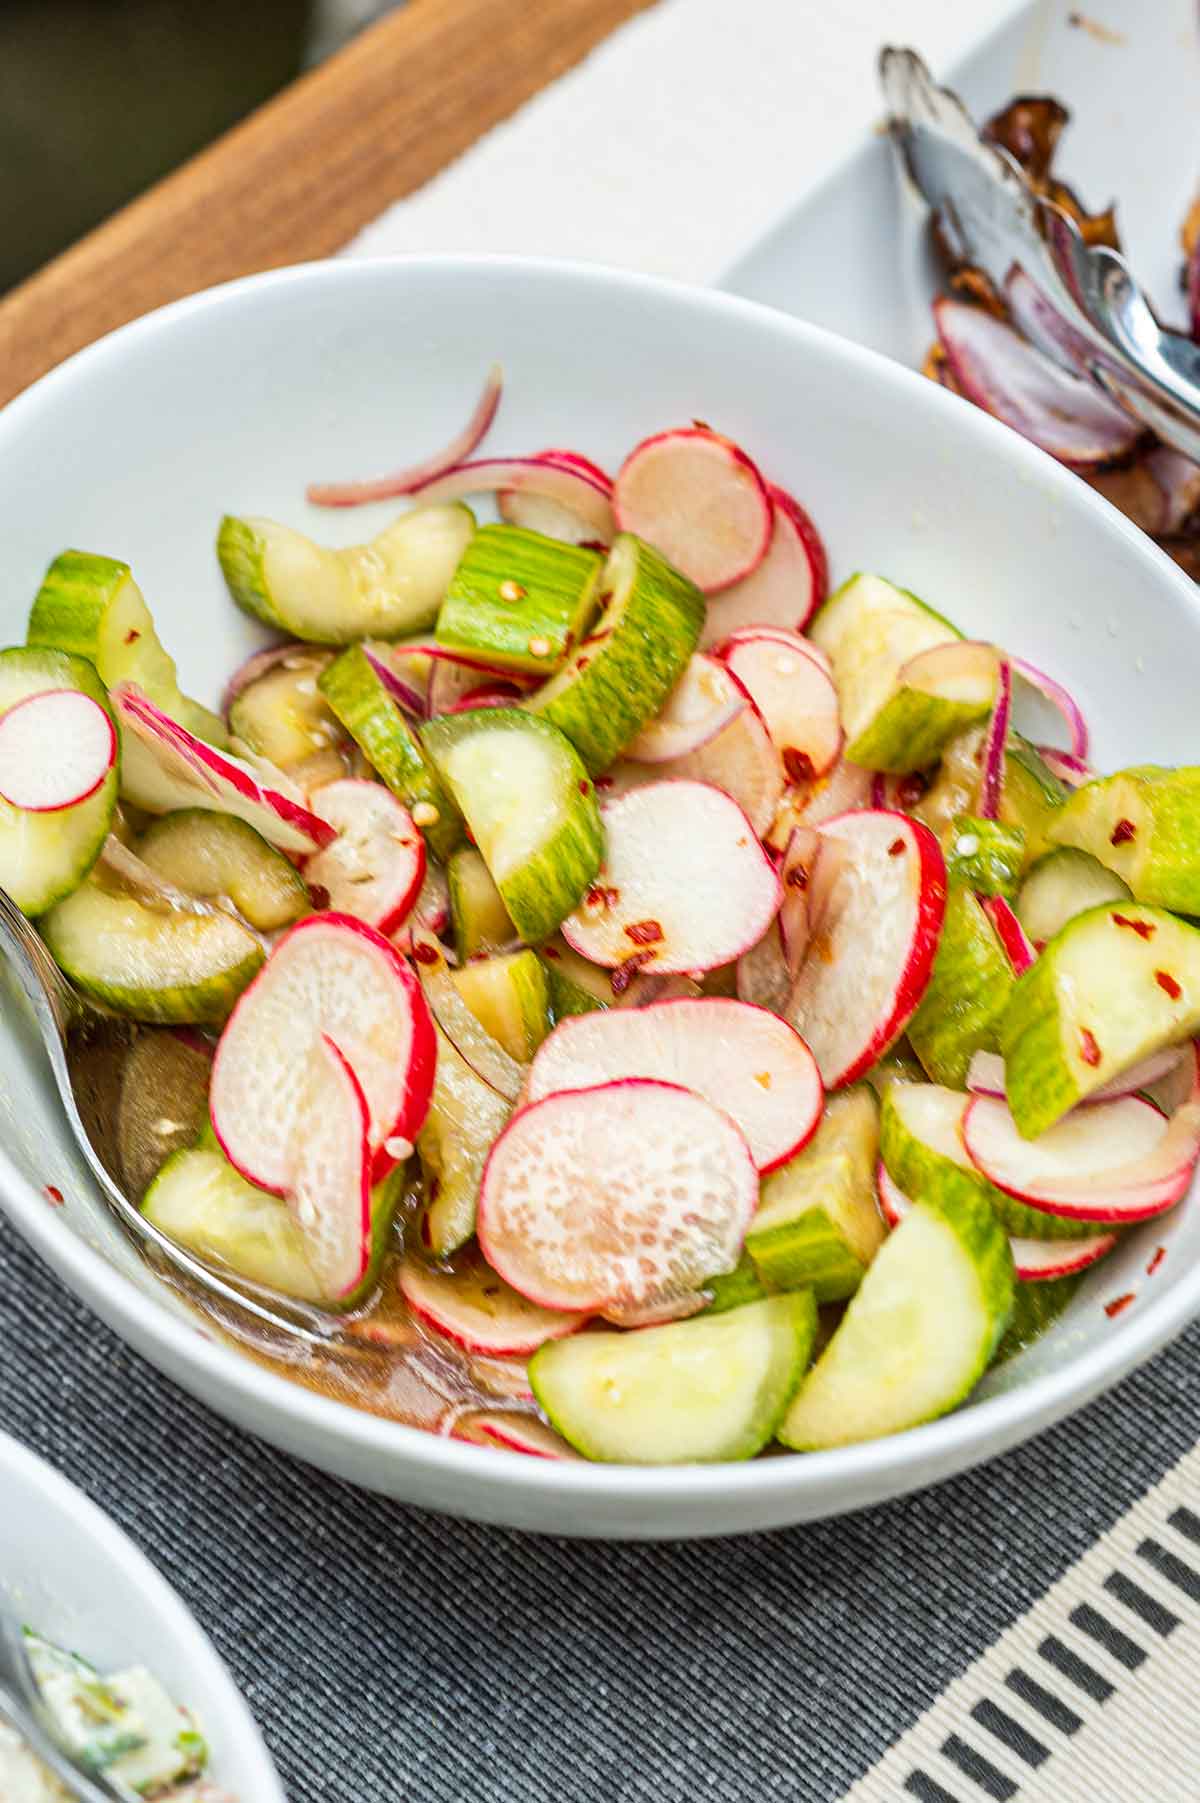 A bowl of ponzu cucumbers and radishes on a table.